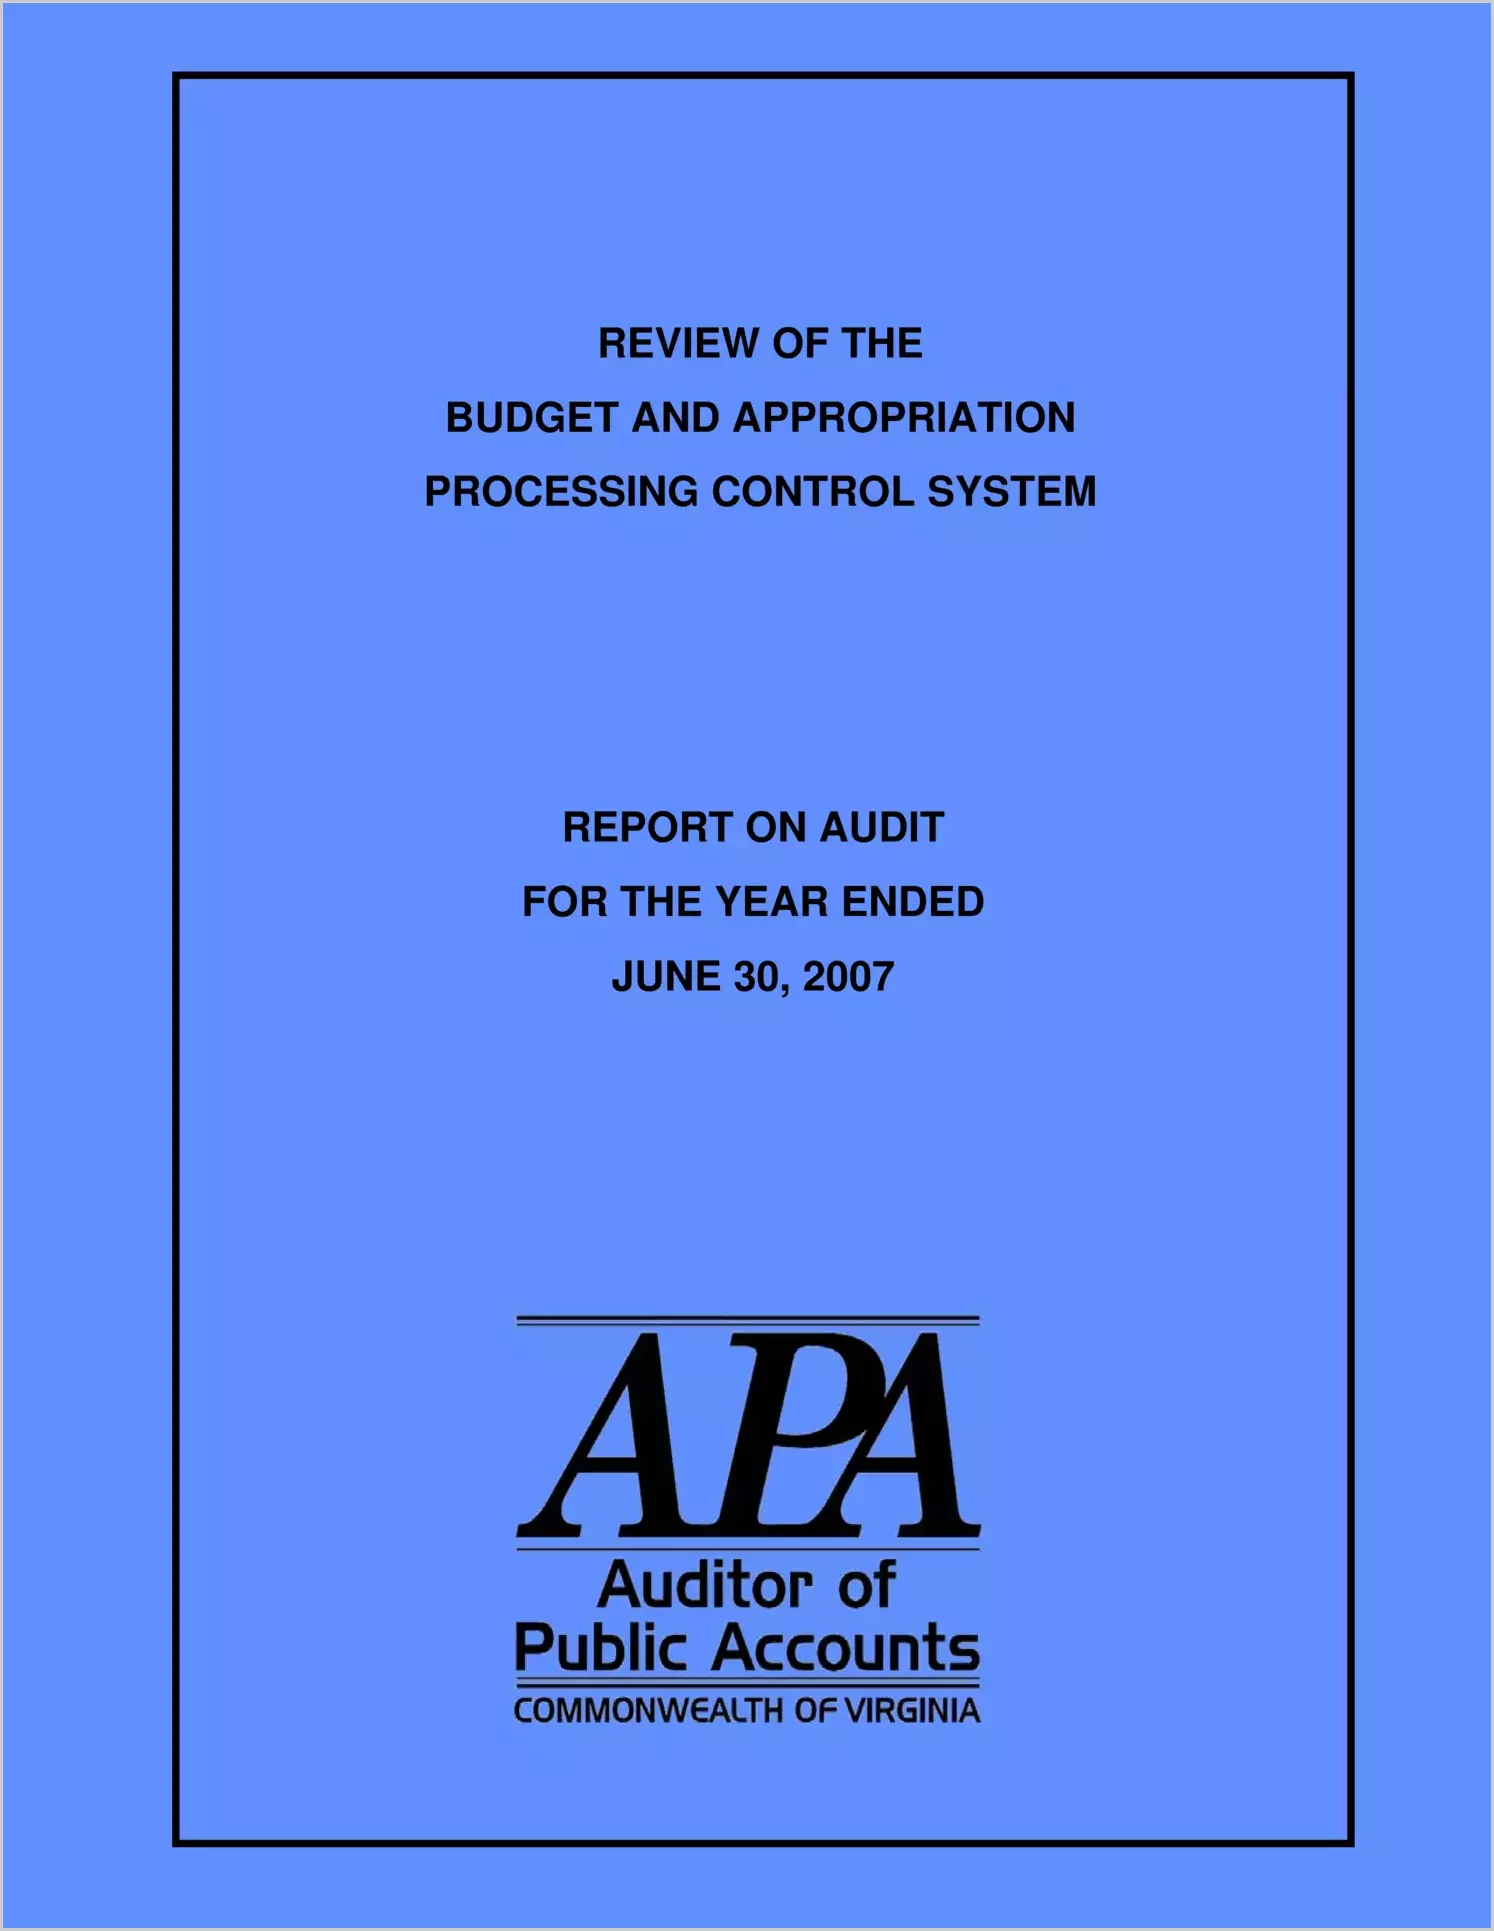 Report on Budget and Appropriation Processing Control System For Fiscal Year Ended June 30, 2007